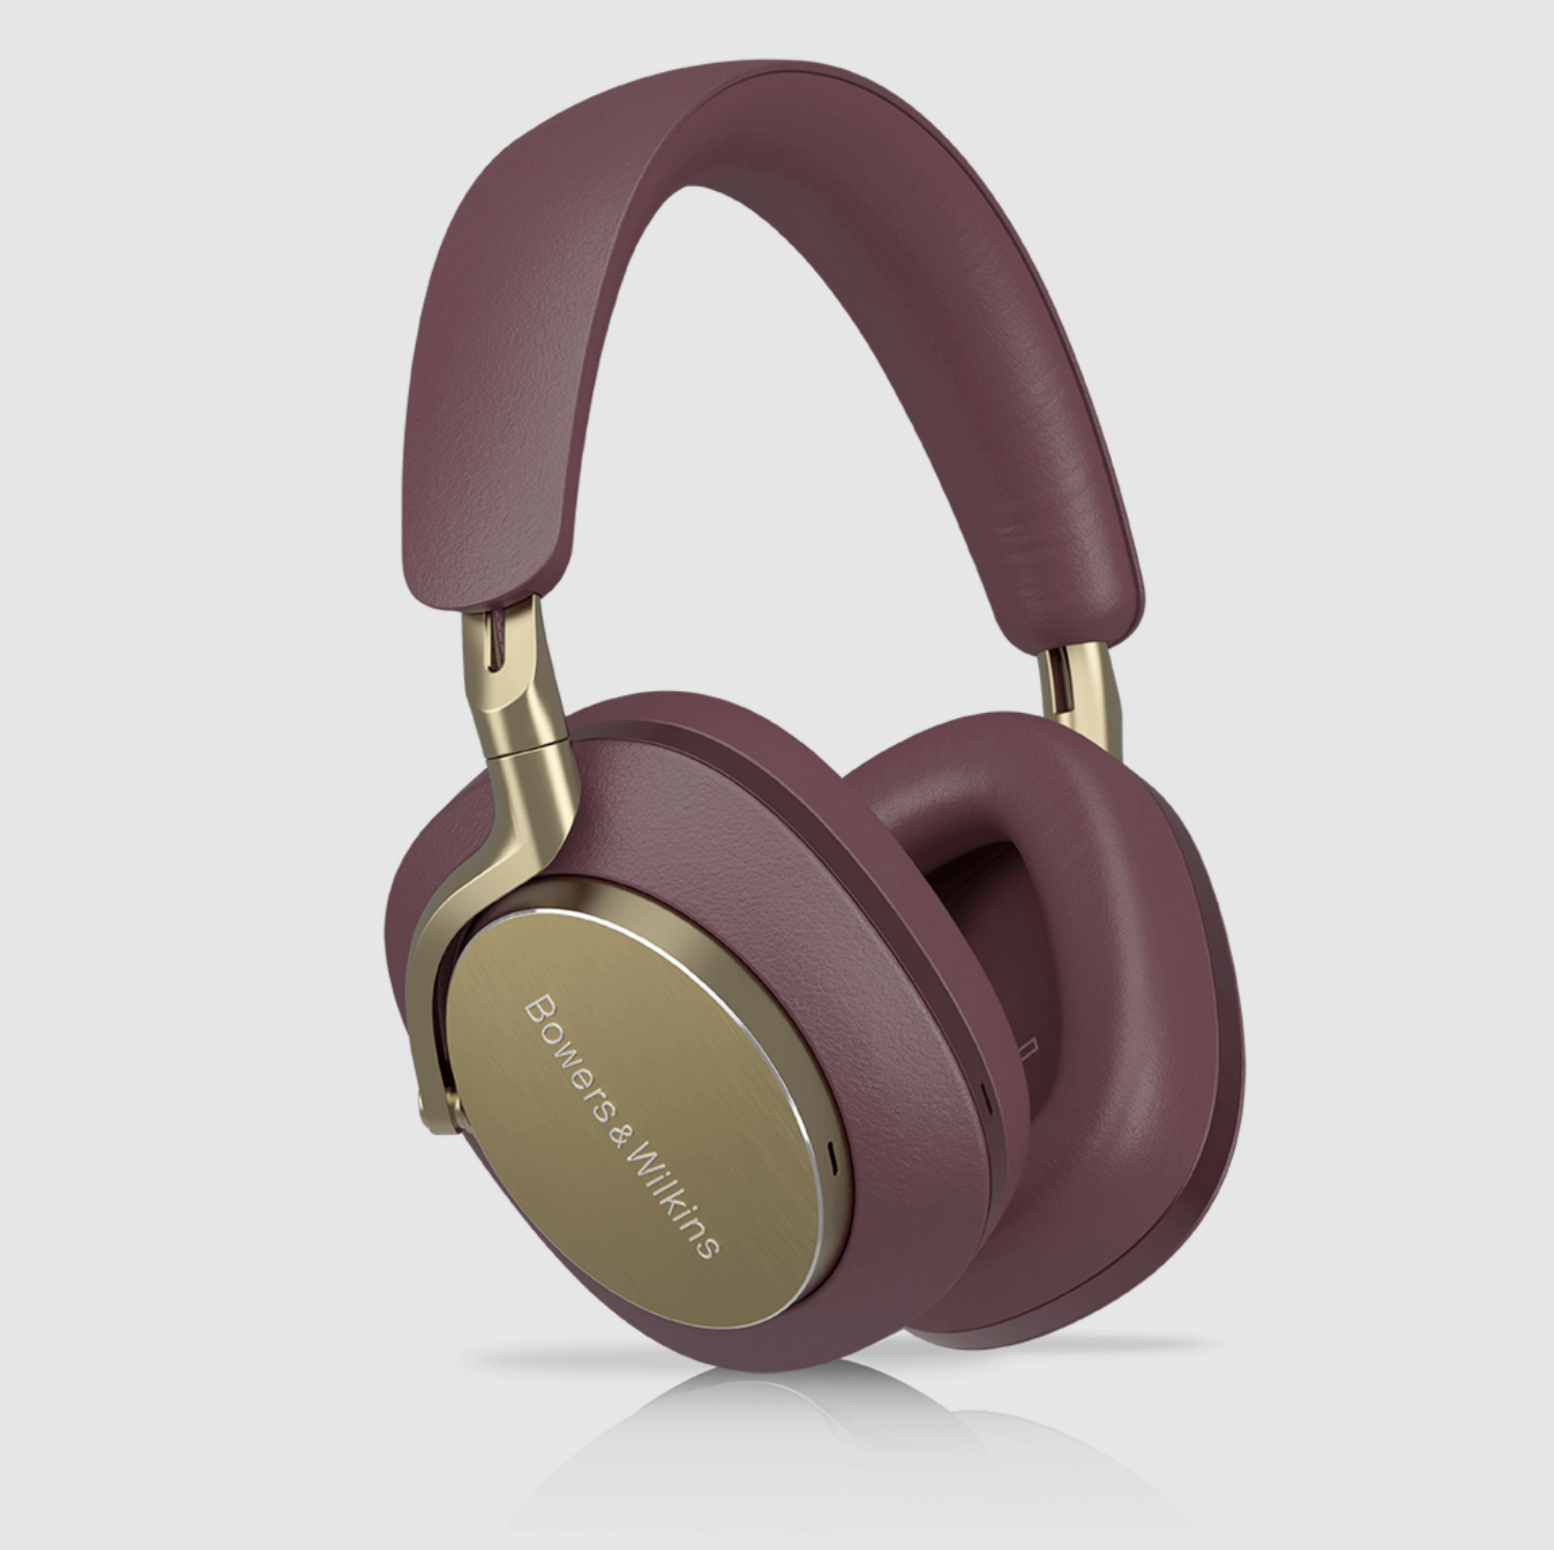 B&W Px8 Noise Cancelling Headphones in Royal Burgundy.